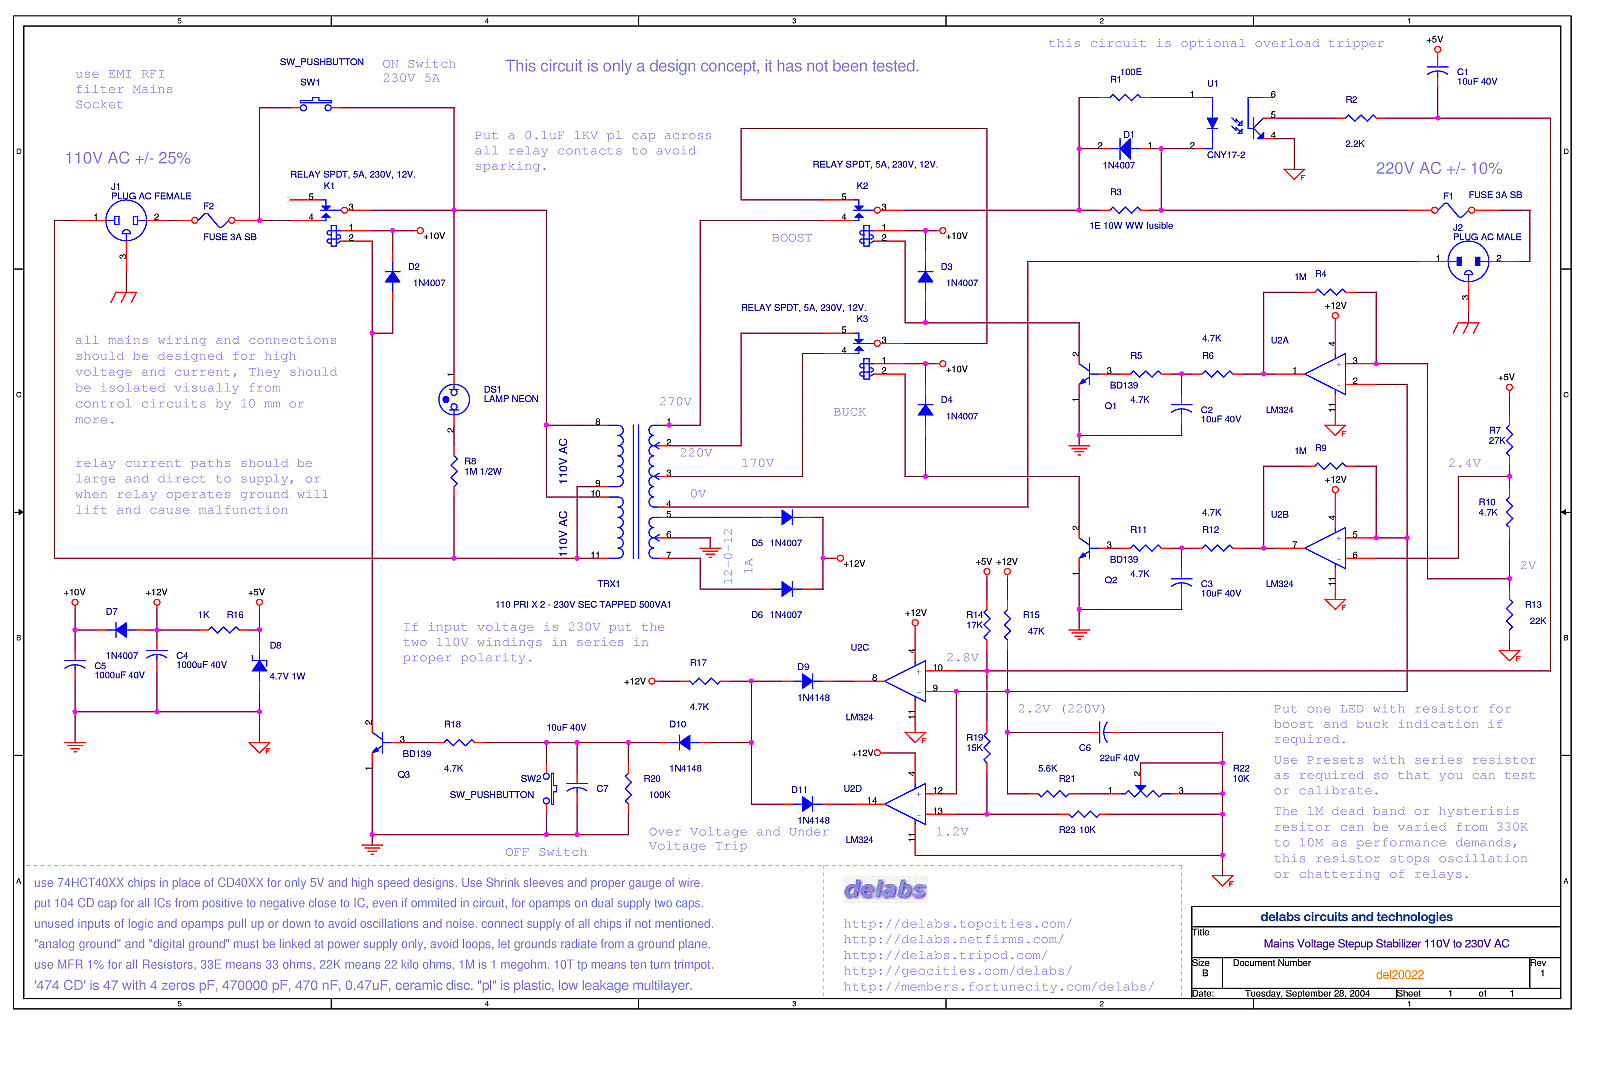 schematics of delabs ohmmeter simple resistance measurement data tera ohm meter power supply by icl7650 schematic diagrams